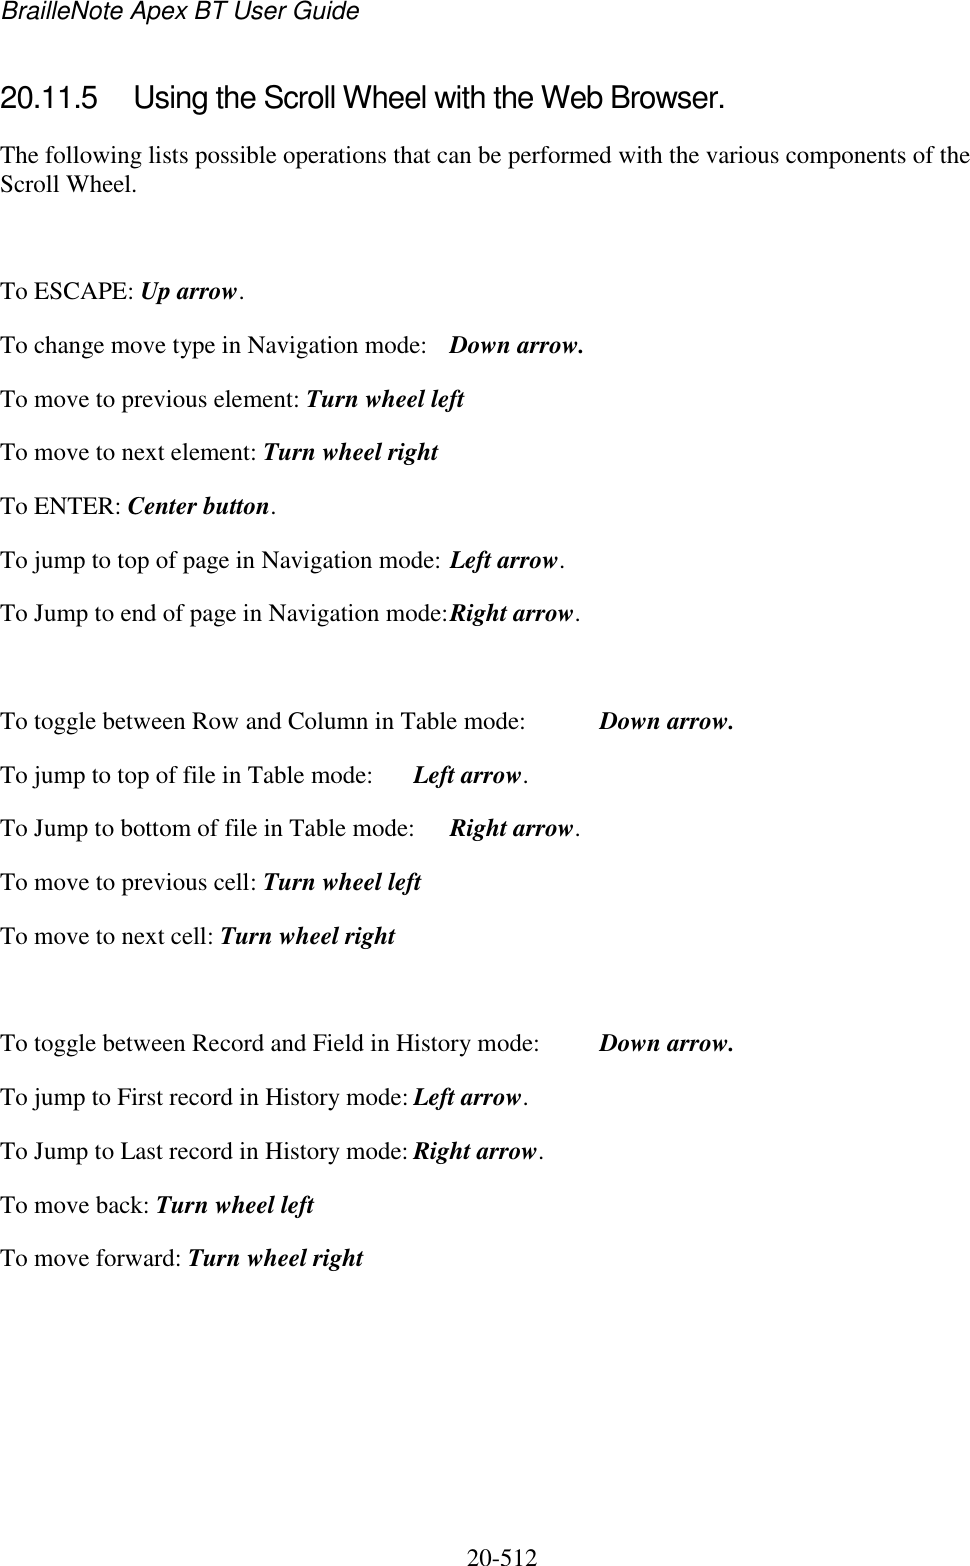 BrailleNote Apex BT User Guide   20-512   20.11.5  Using the Scroll Wheel with the Web Browser. The following lists possible operations that can be performed with the various components of the Scroll Wheel.   To ESCAPE: Up arrow. To change move type in Navigation mode:  Down arrow. To move to previous element: Turn wheel left  To move to next element: Turn wheel right To ENTER: Center button. To jump to top of page in Navigation mode: Left arrow. To Jump to end of page in Navigation mode: Right arrow.  To toggle between Row and Column in Table mode:  Down arrow. To jump to top of file in Table mode:  Left arrow. To Jump to bottom of file in Table mode:  Right arrow. To move to previous cell: Turn wheel left  To move to next cell: Turn wheel right  To toggle between Record and Field in History mode:  Down arrow. To jump to First record in History mode: Left arrow. To Jump to Last record in History mode: Right arrow. To move back: Turn wheel left  To move forward: Turn wheel right      